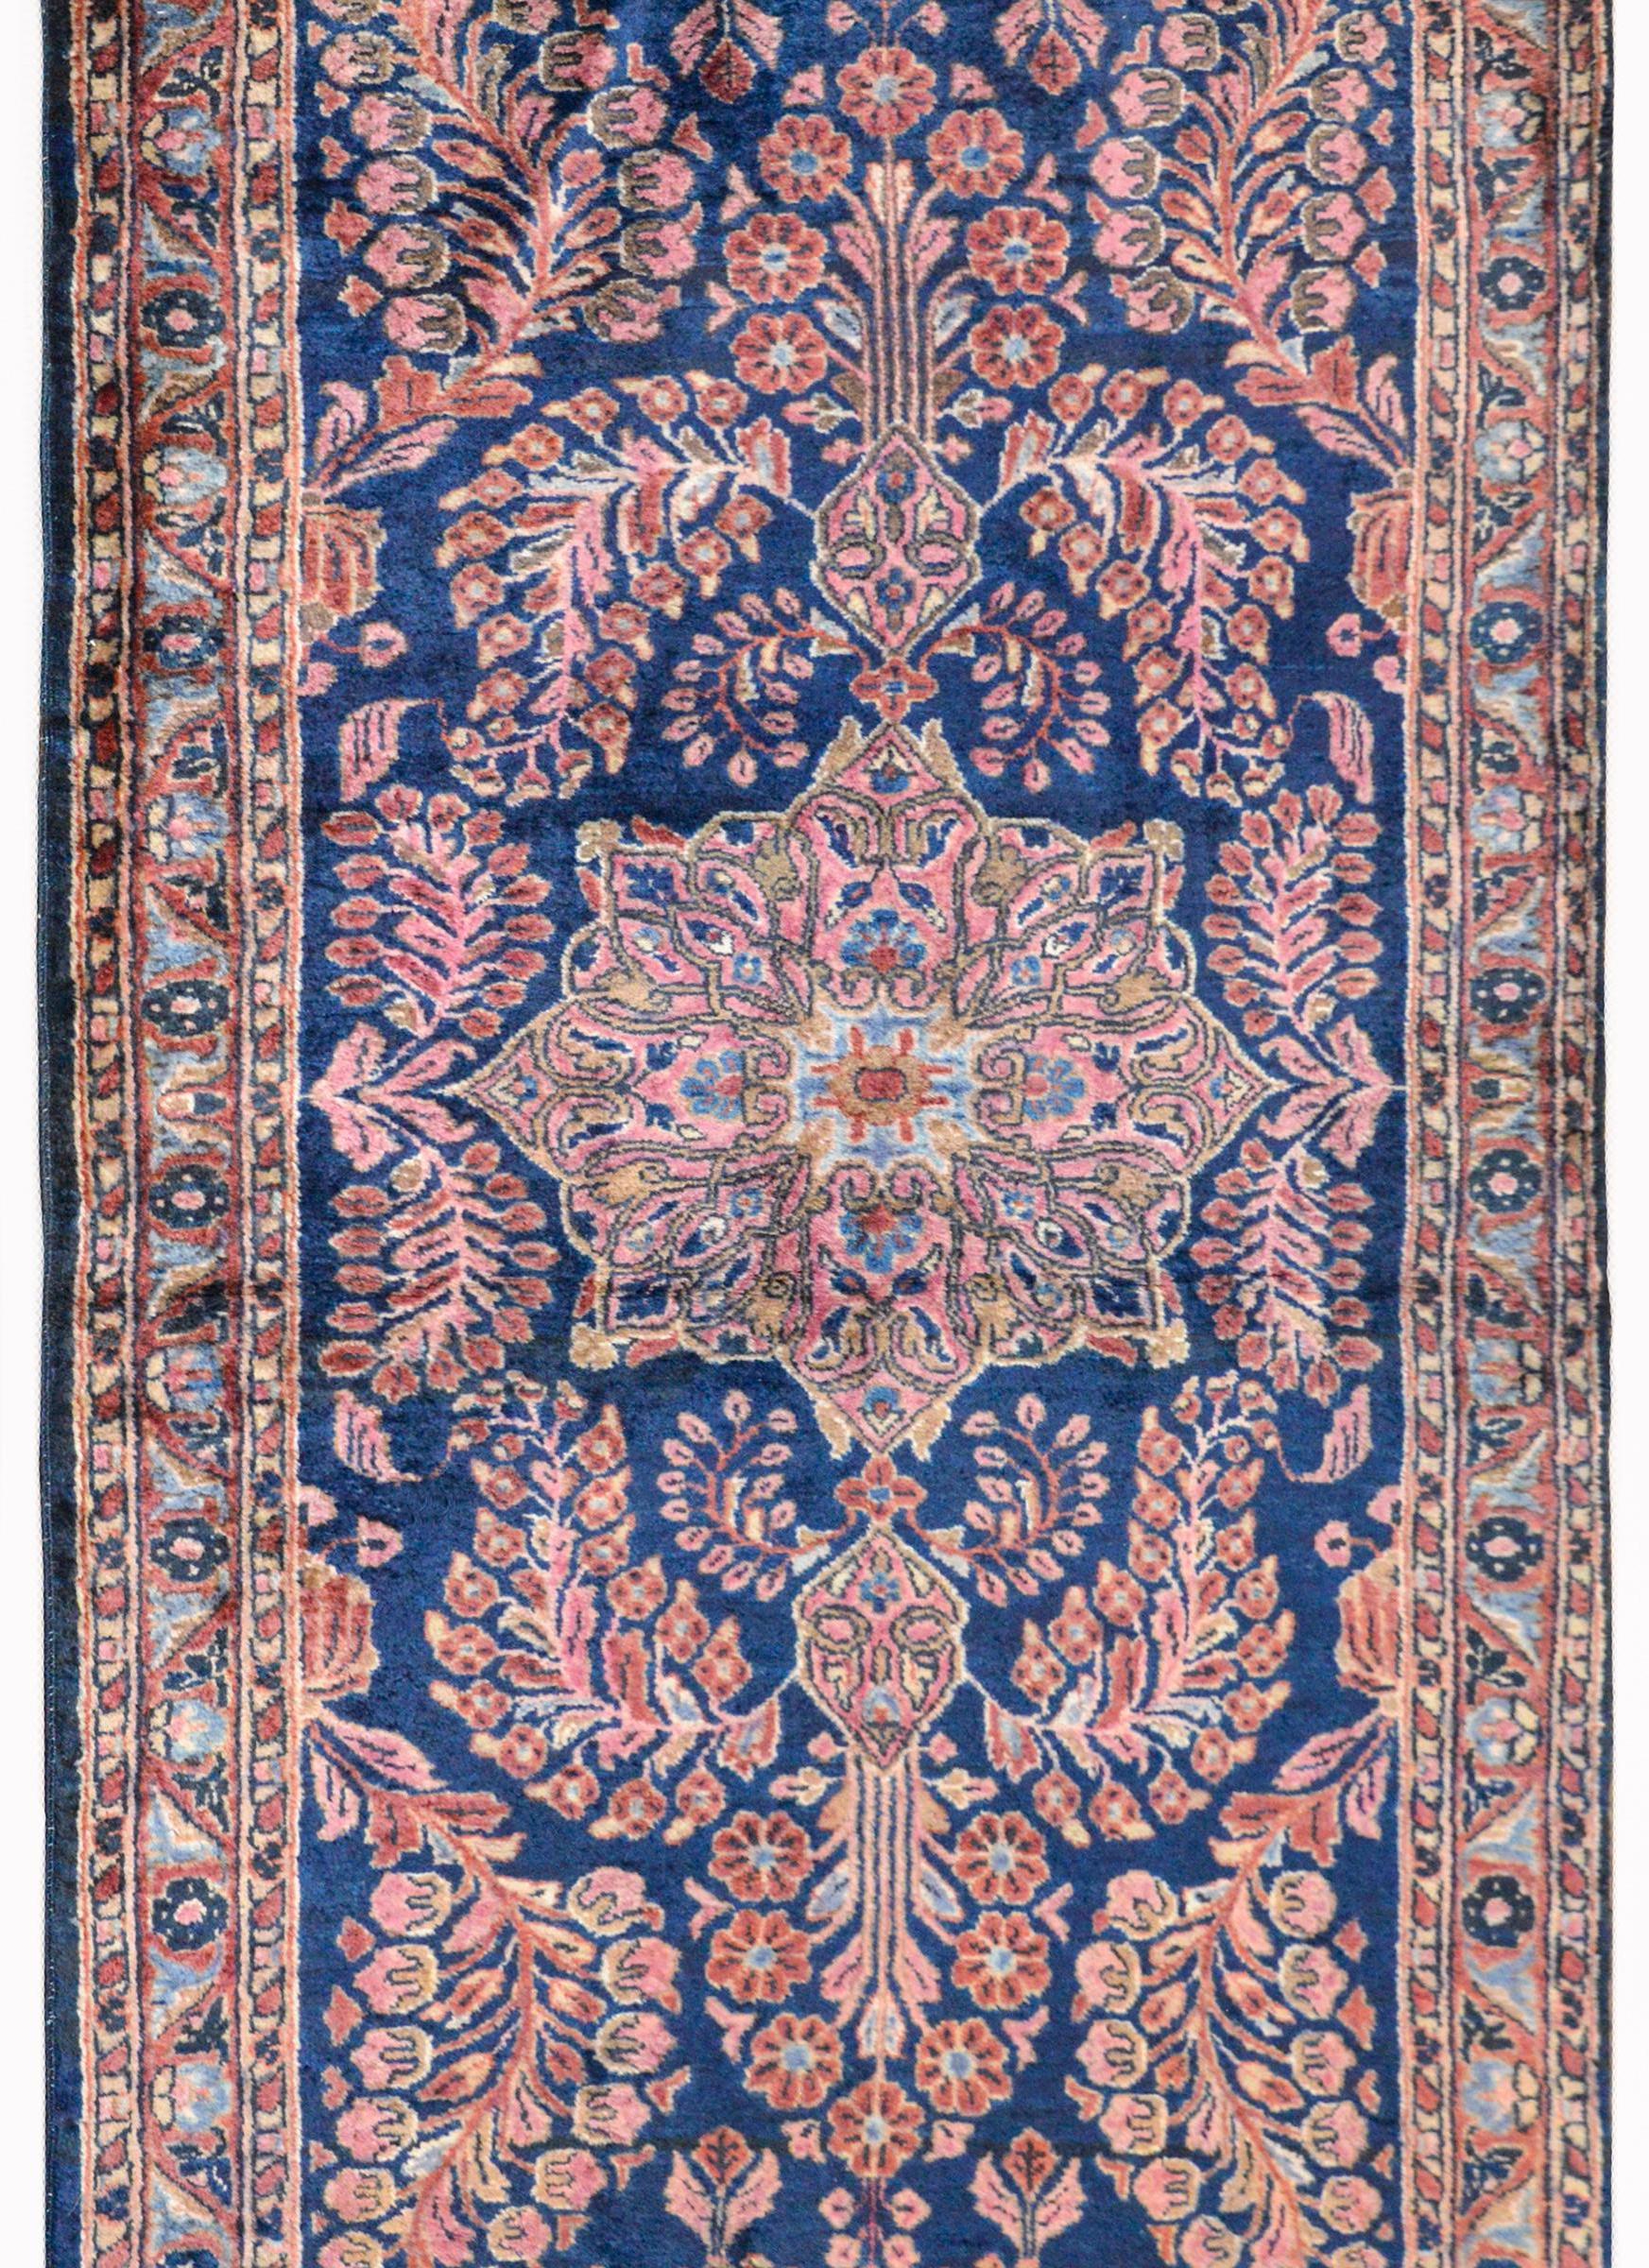 A beautiful early 20th century Persian Sarouk rug with large central floral medallion woven in myriad colors against a dark indigo background, and amidst a field or mirrored large scale scrolling vines, flowers, and leaves. The border is complex